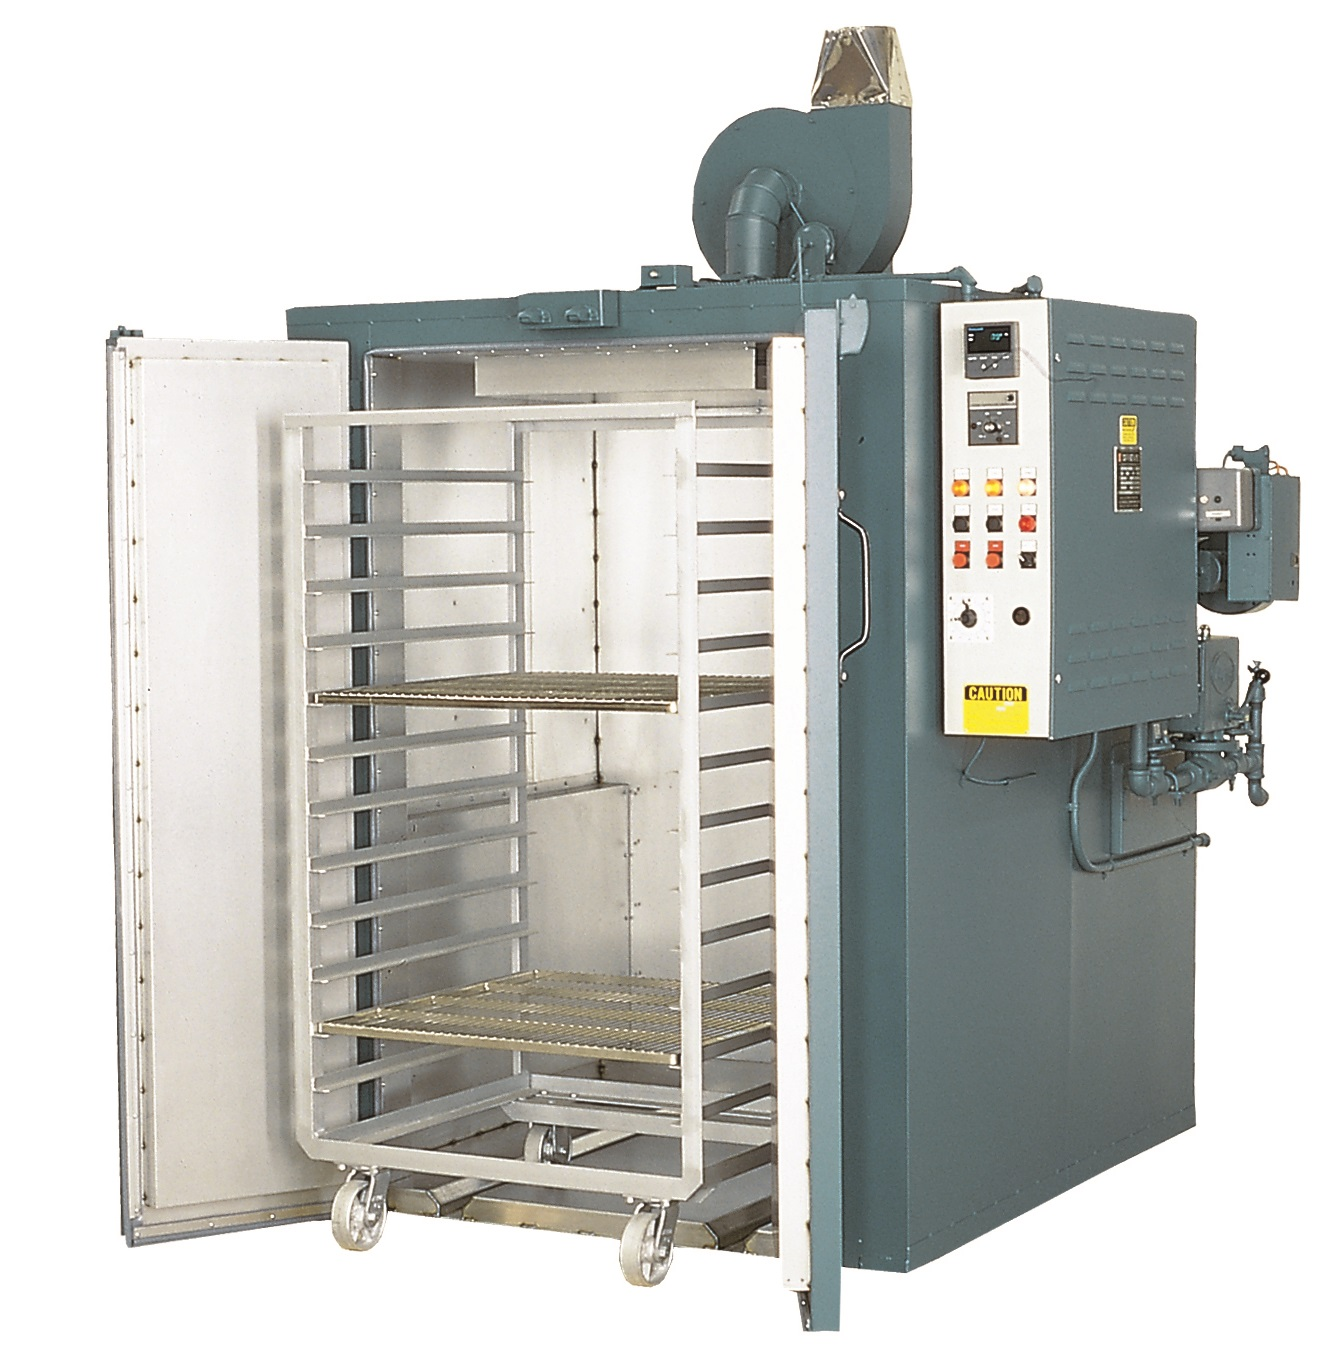 A heat treat oven with a furnace and a quench tank